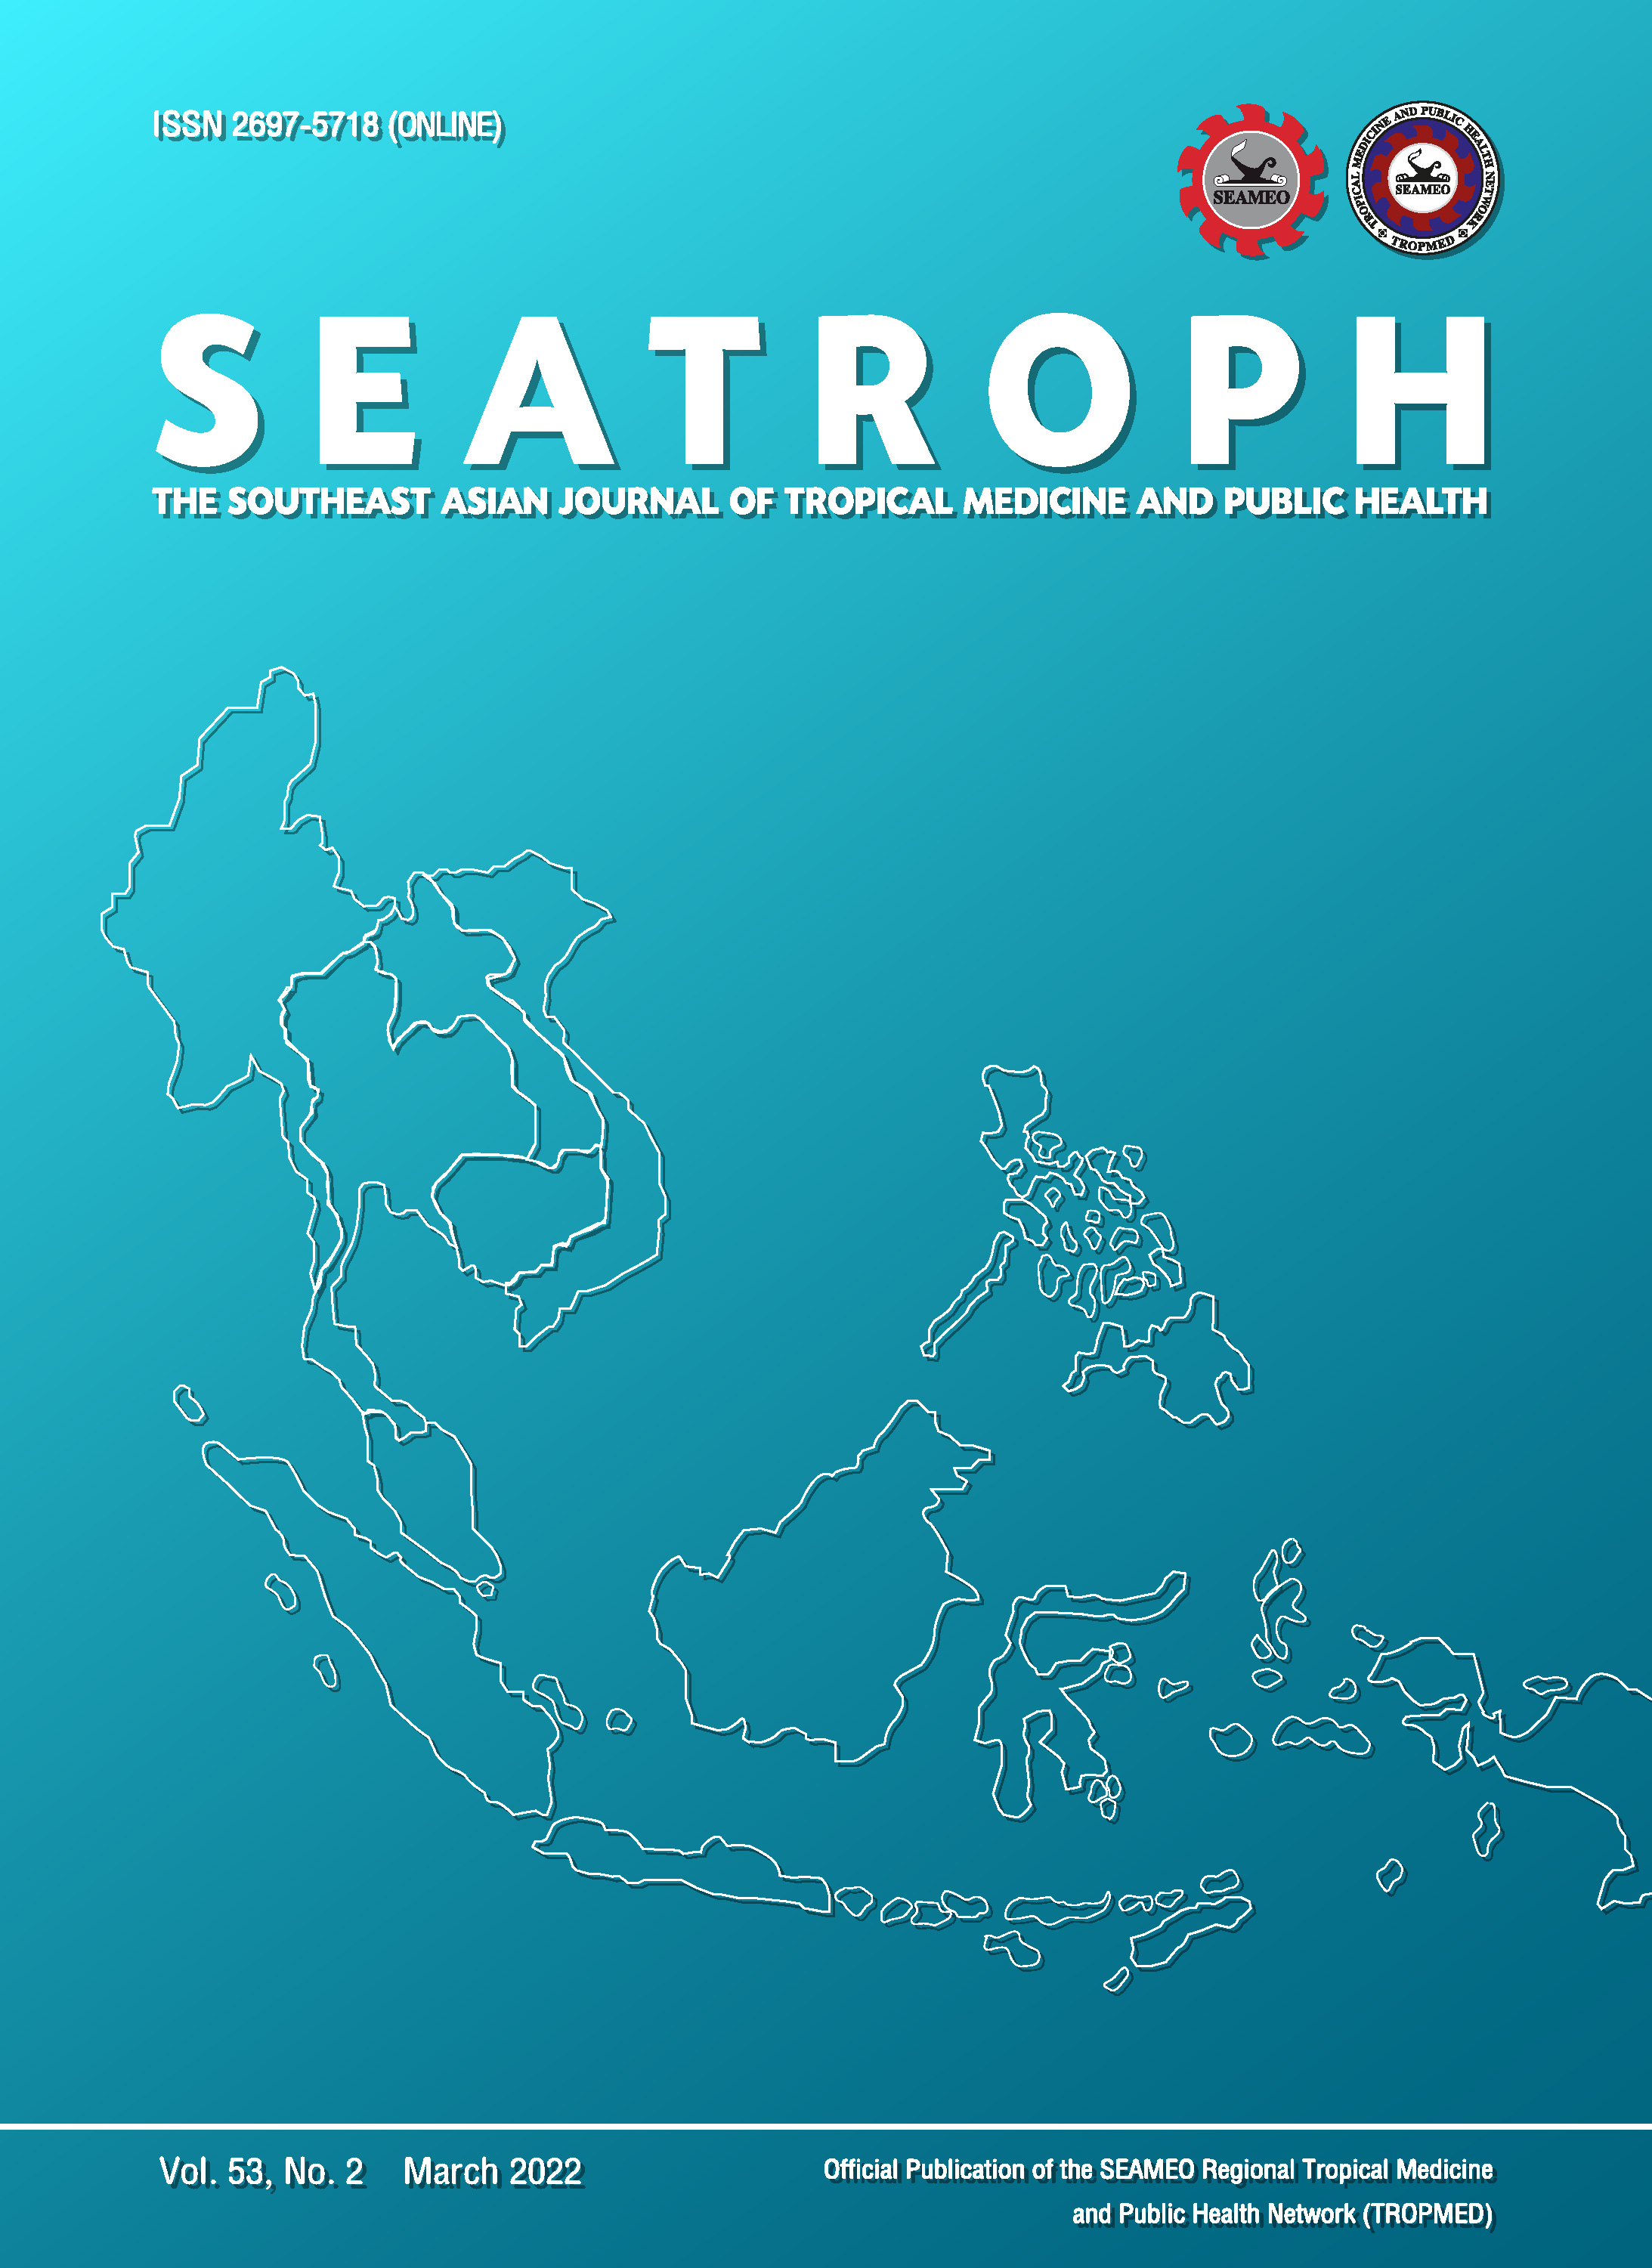 					View Vol. 53 No. 2 (2022): THE SOUTHEAST ASIAN JOURNAL OF TROPICAL MEDICINE AND PUBLIC HEALTH
				